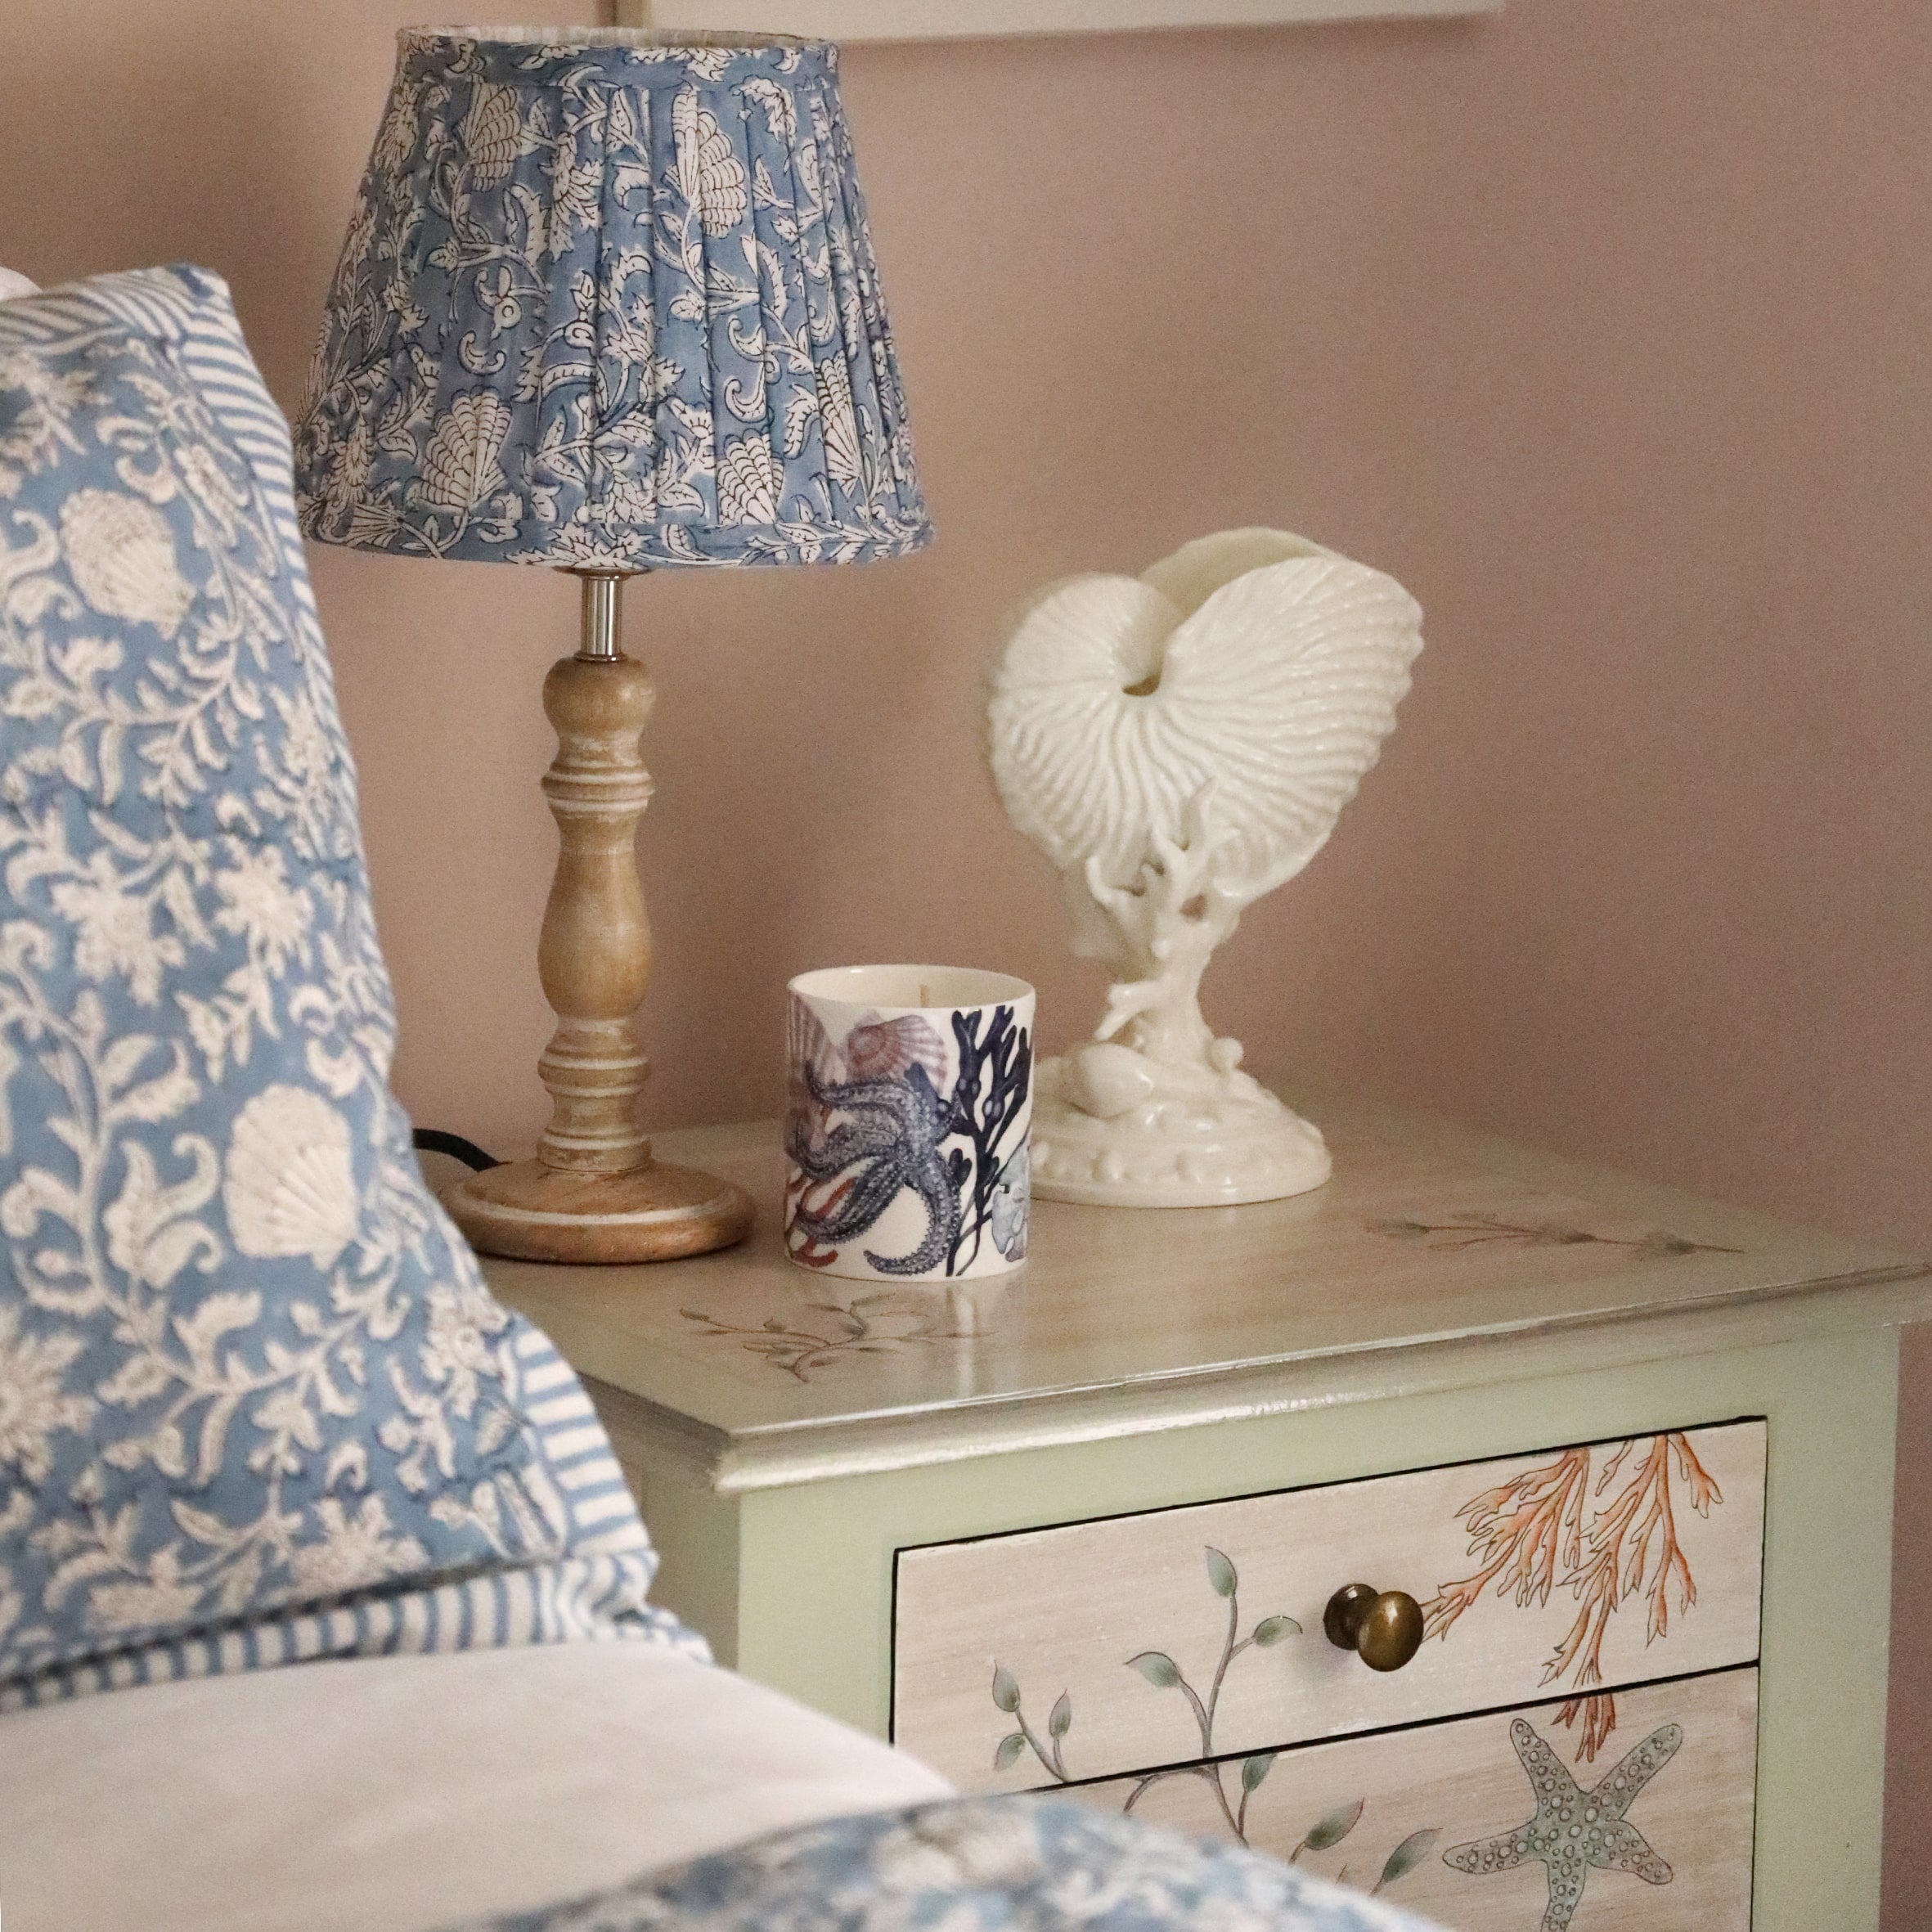 Small pleated Atlantic Blue Seashell Flower lampshade in hand blocked print in blue and white on a wooden lampbase on a bedside cabinet.On the cabinet is a beachcomber candle and a shell ornament.In the foreground you can see our hand block printed bed linen on a bed.